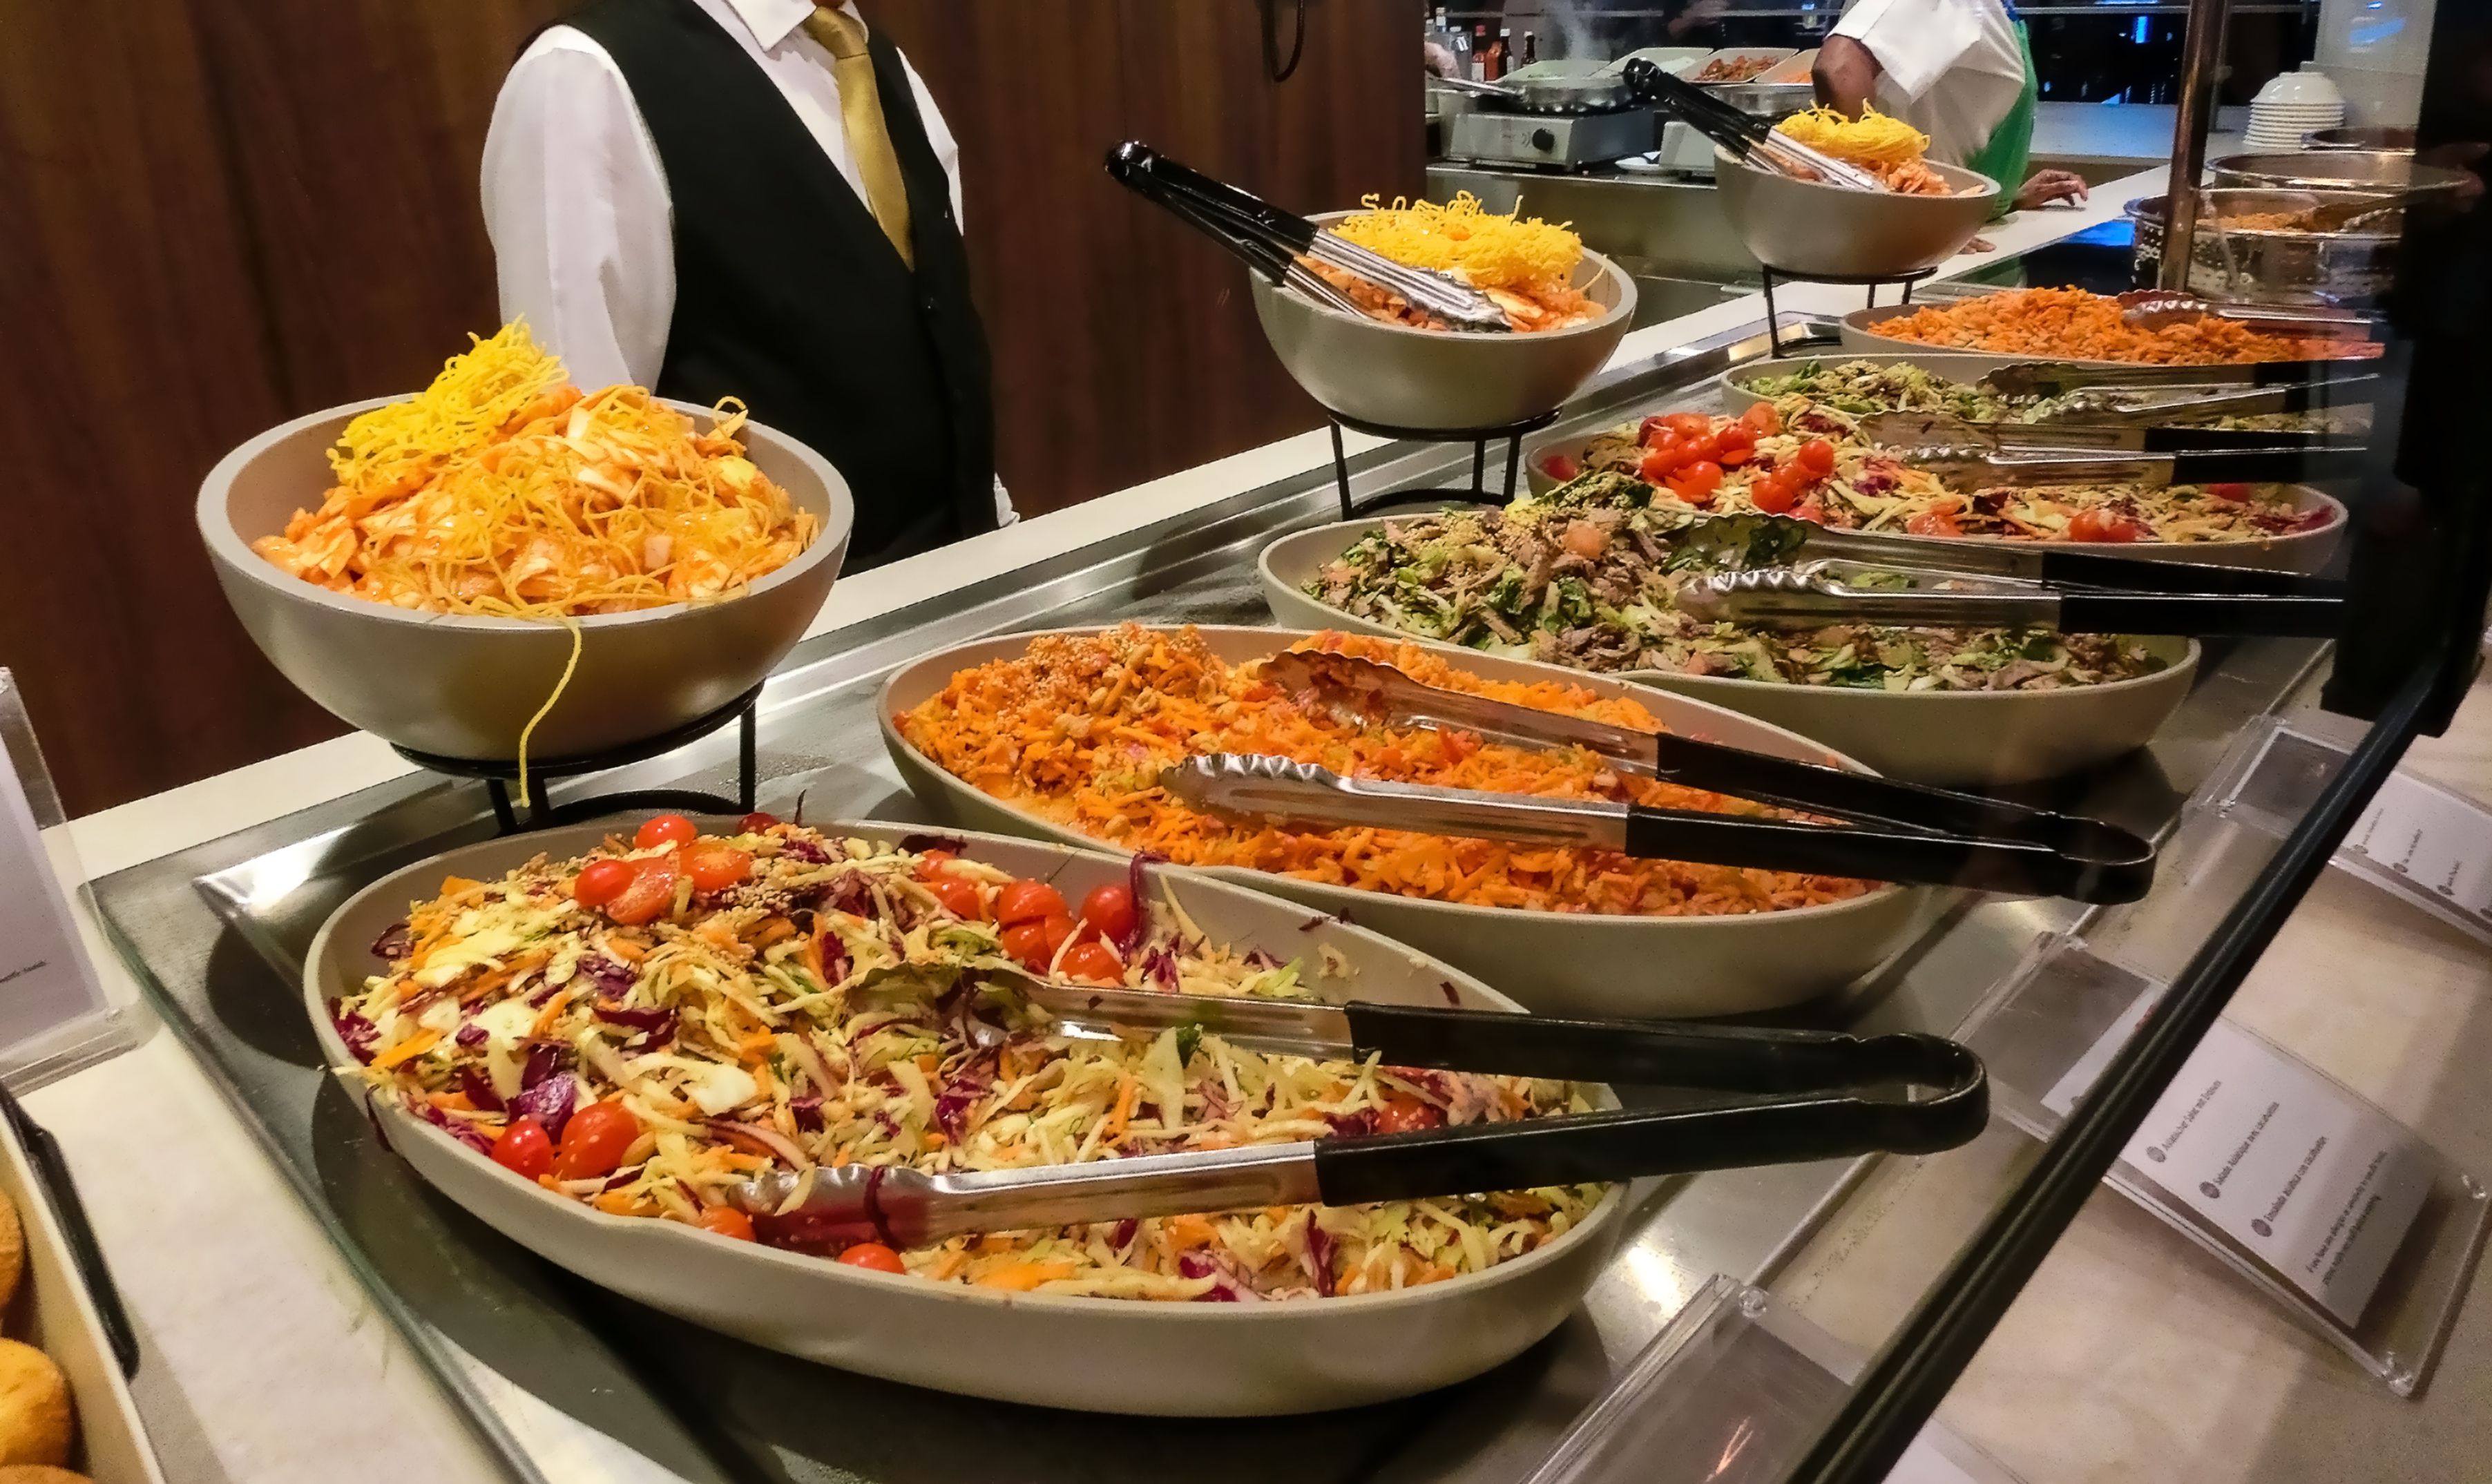 <p>Remember: Food (often a buffet) is included with your ticket. If you want to save money, don’t be enticed by expensive upgrades, especially since dinner is often quite good in the main dining room, one Redditor writes.</p>